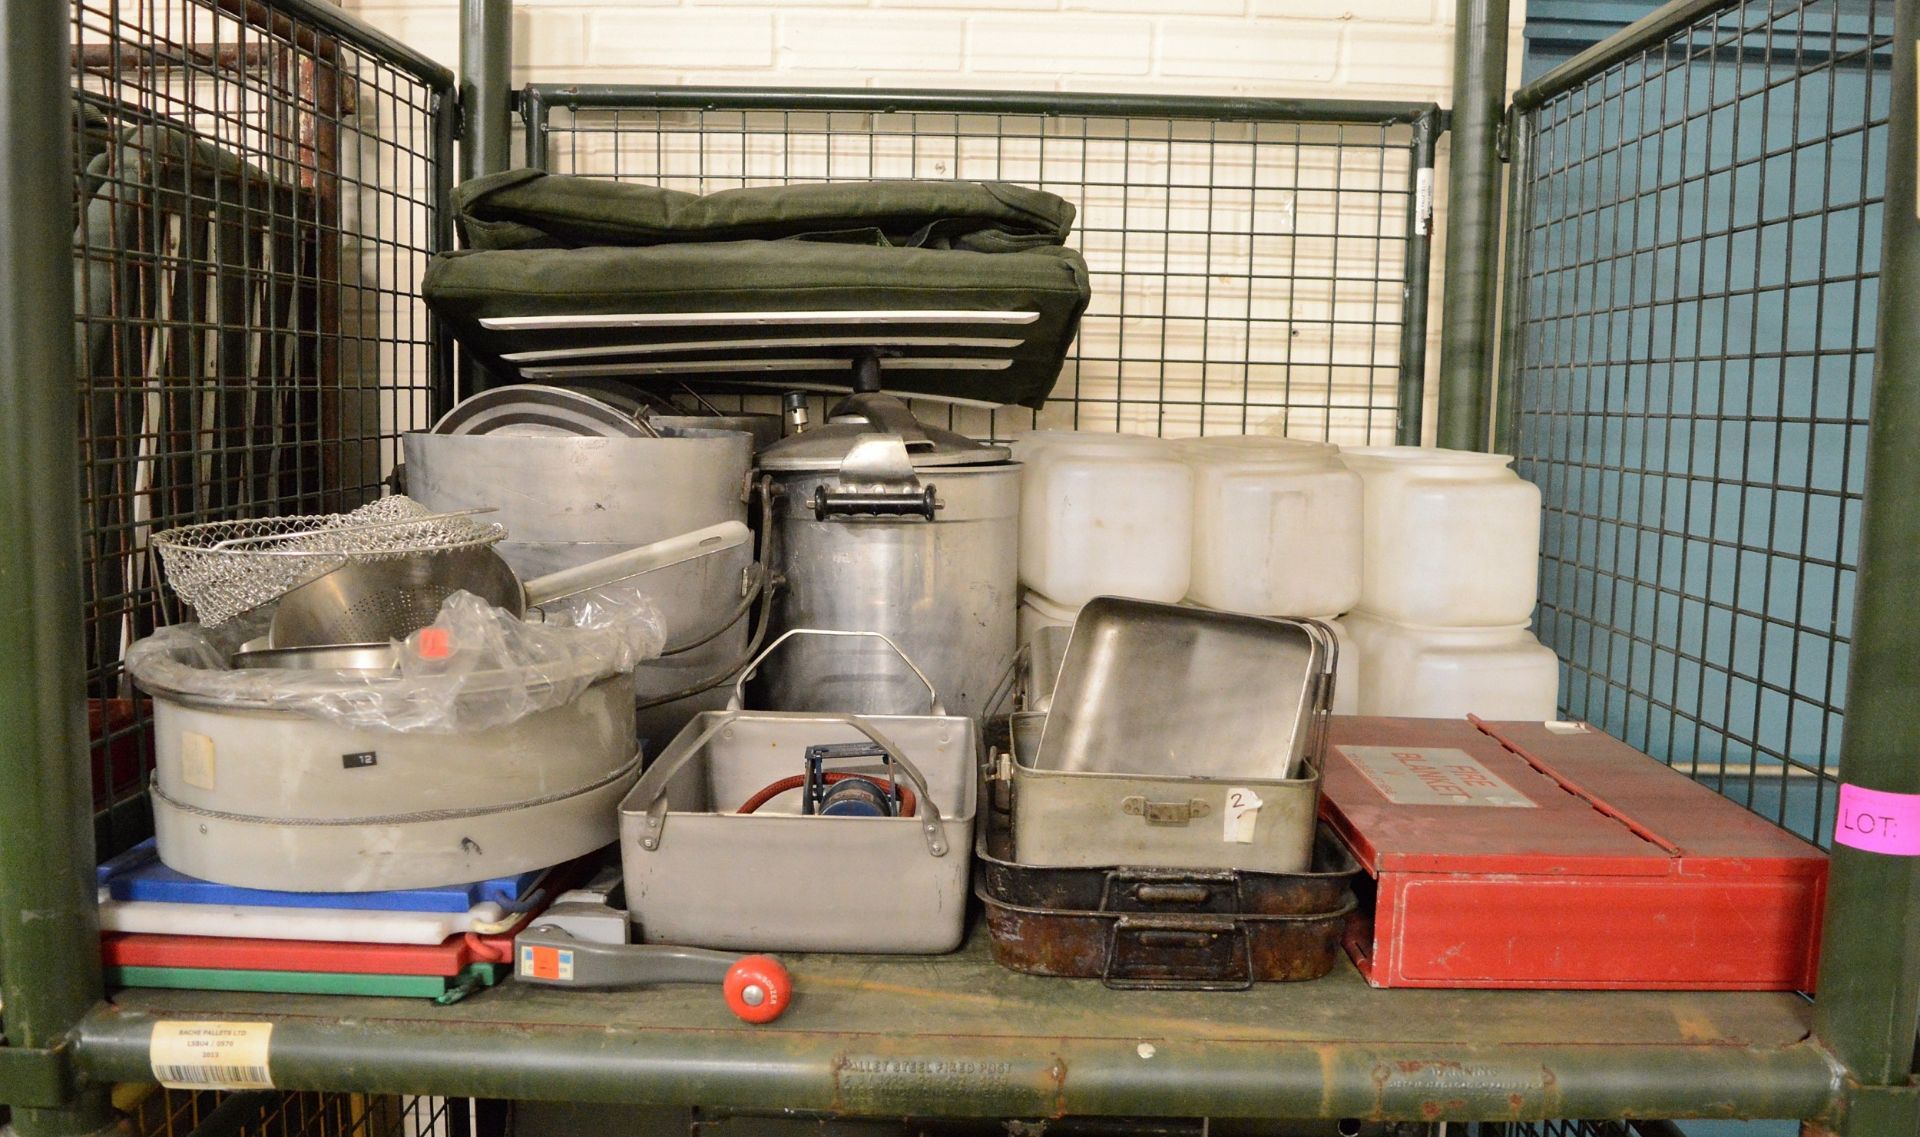 Field Kitchen set - cooker, oven, utensil set in carry box, norweigen food boxes, accessor - Image 2 of 5